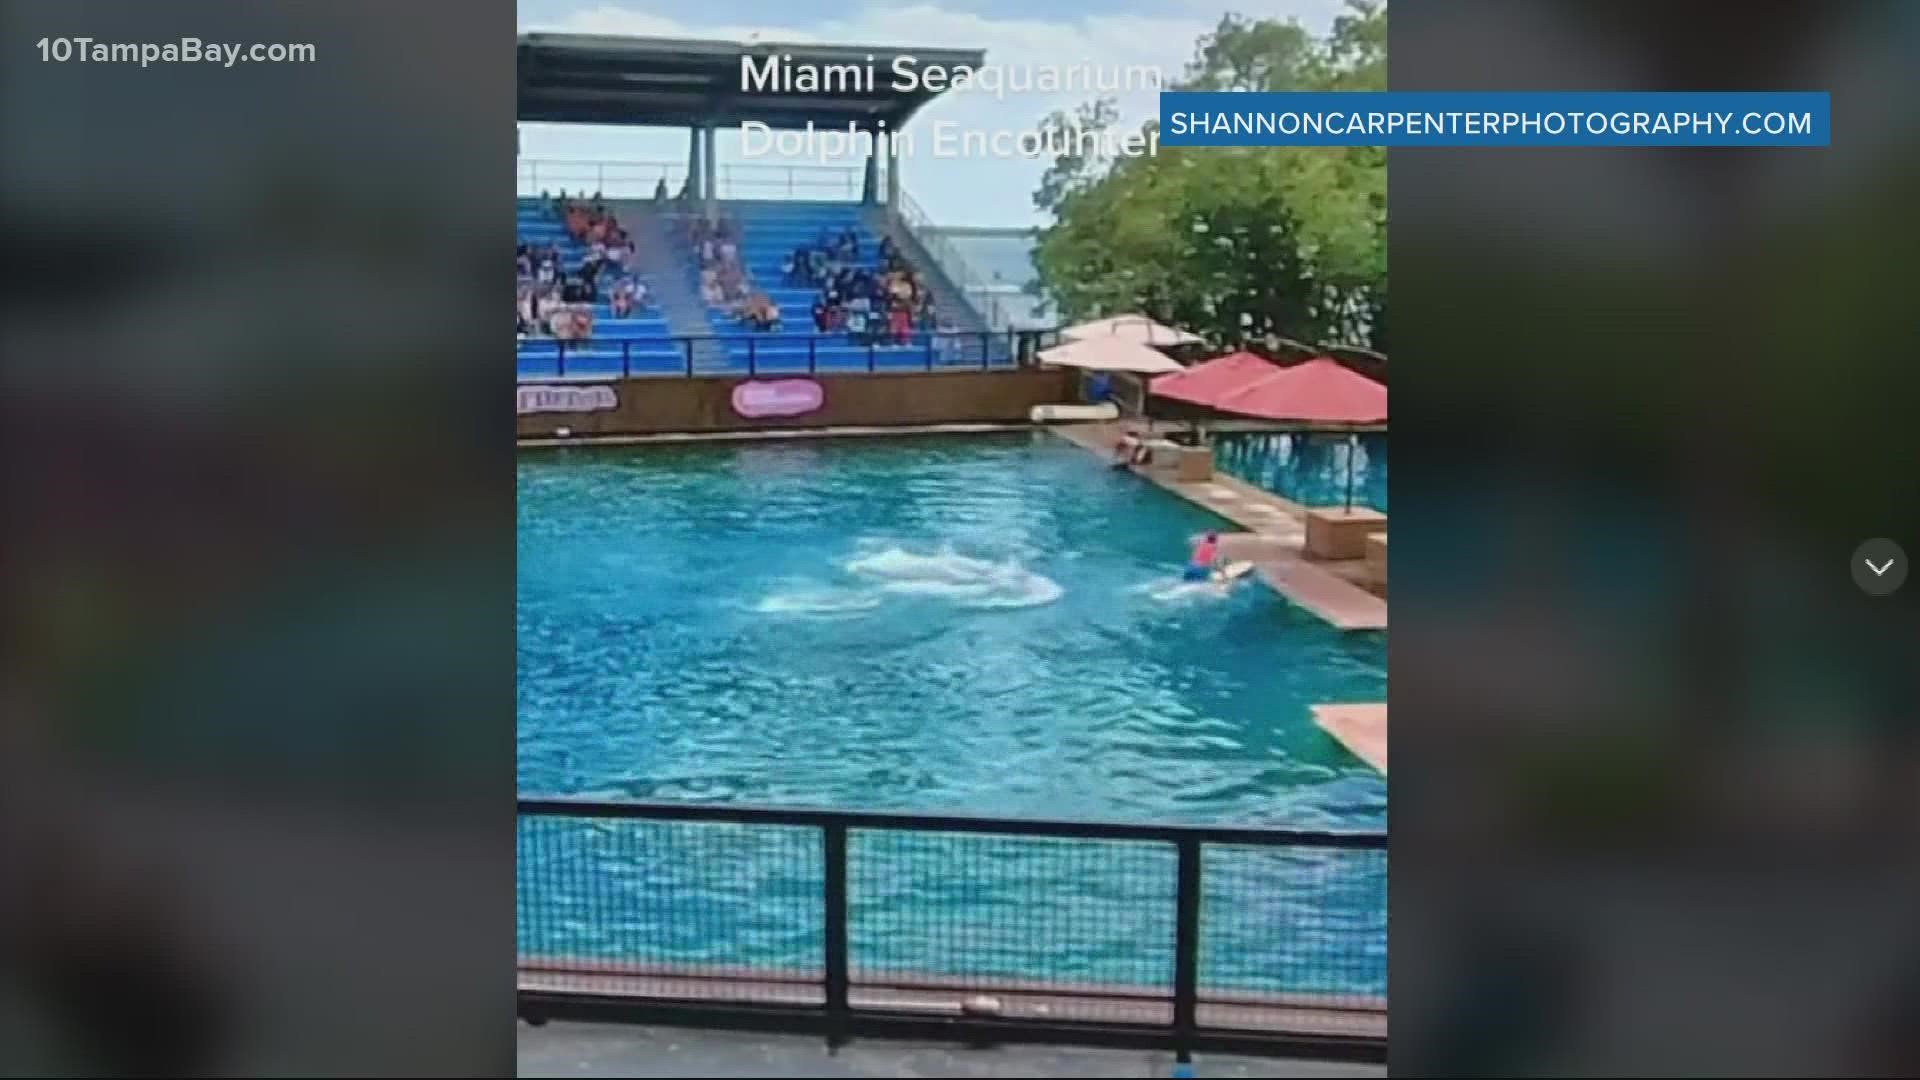 The trainer was able to swim to safety. The dolphin was not hurt.